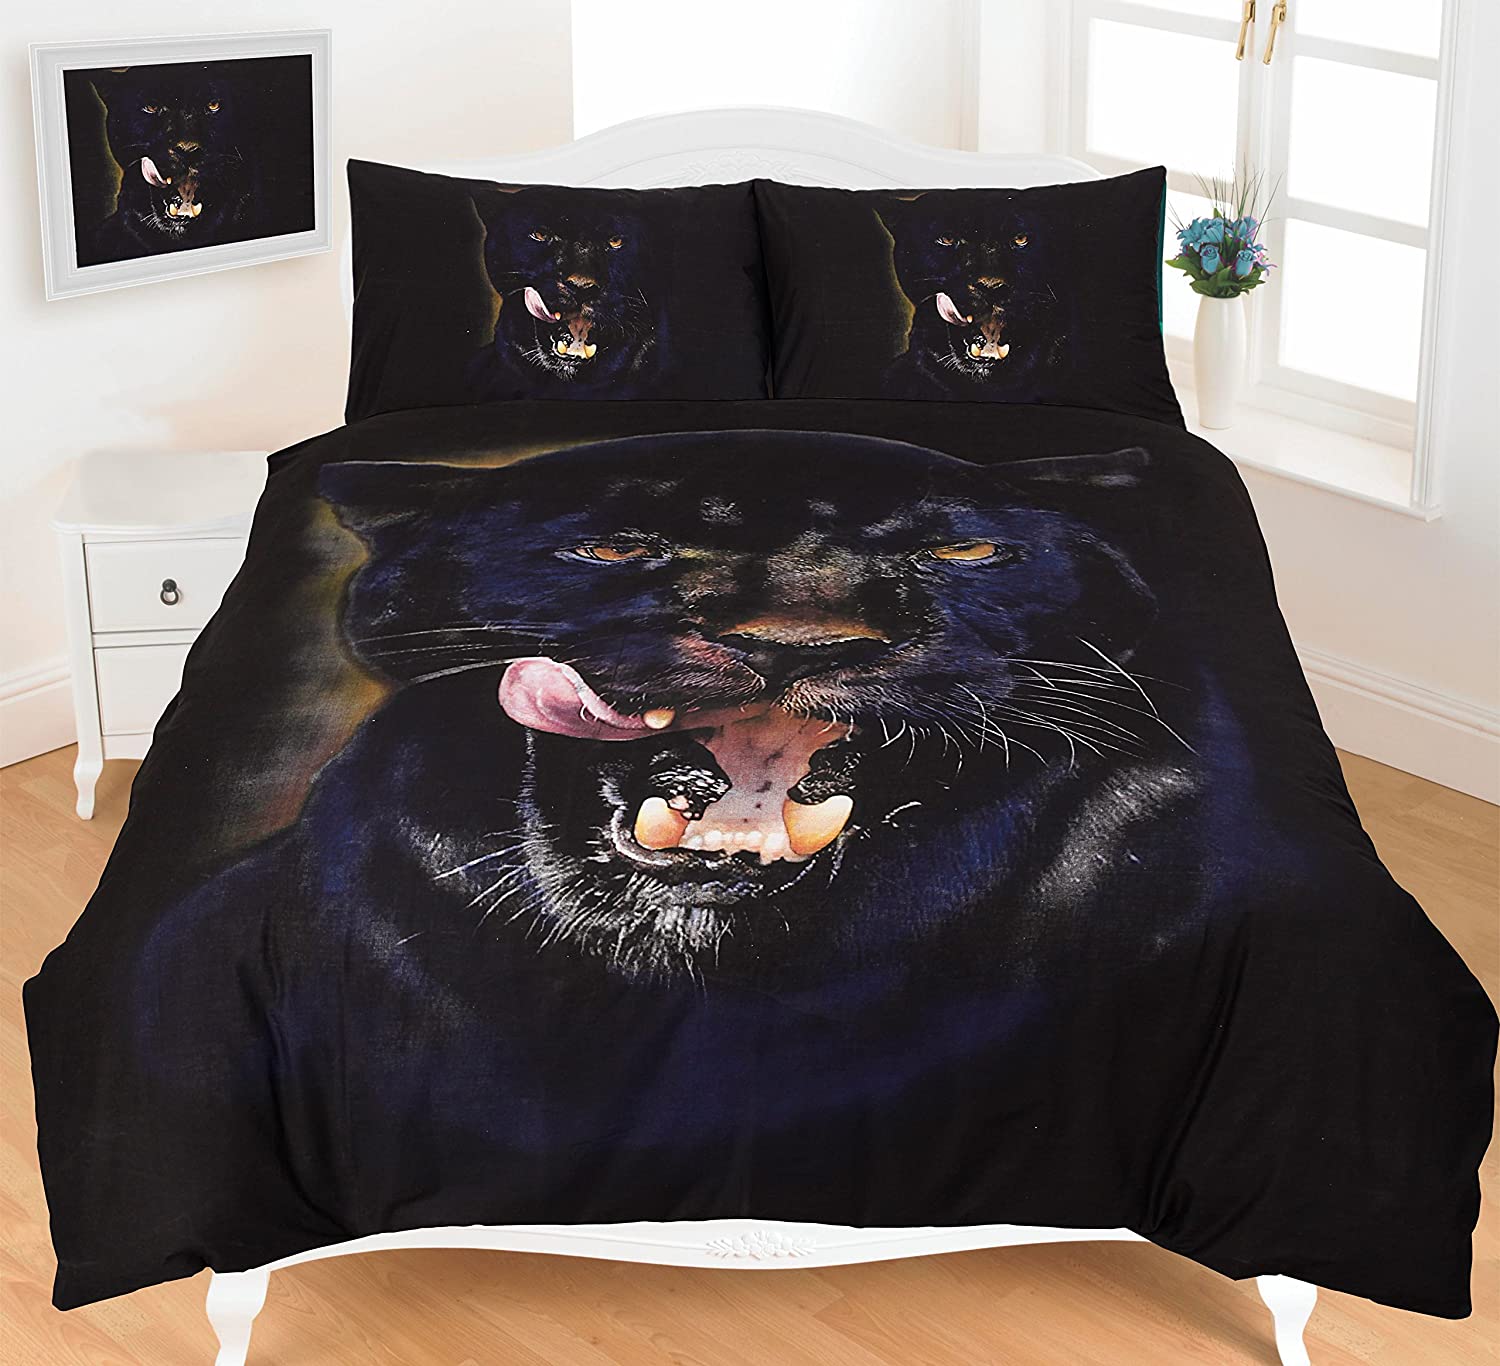 Black Panther 3D Duvet Cover Sets With Pillowcases - Poly Cotton Fabric 3D Bedding